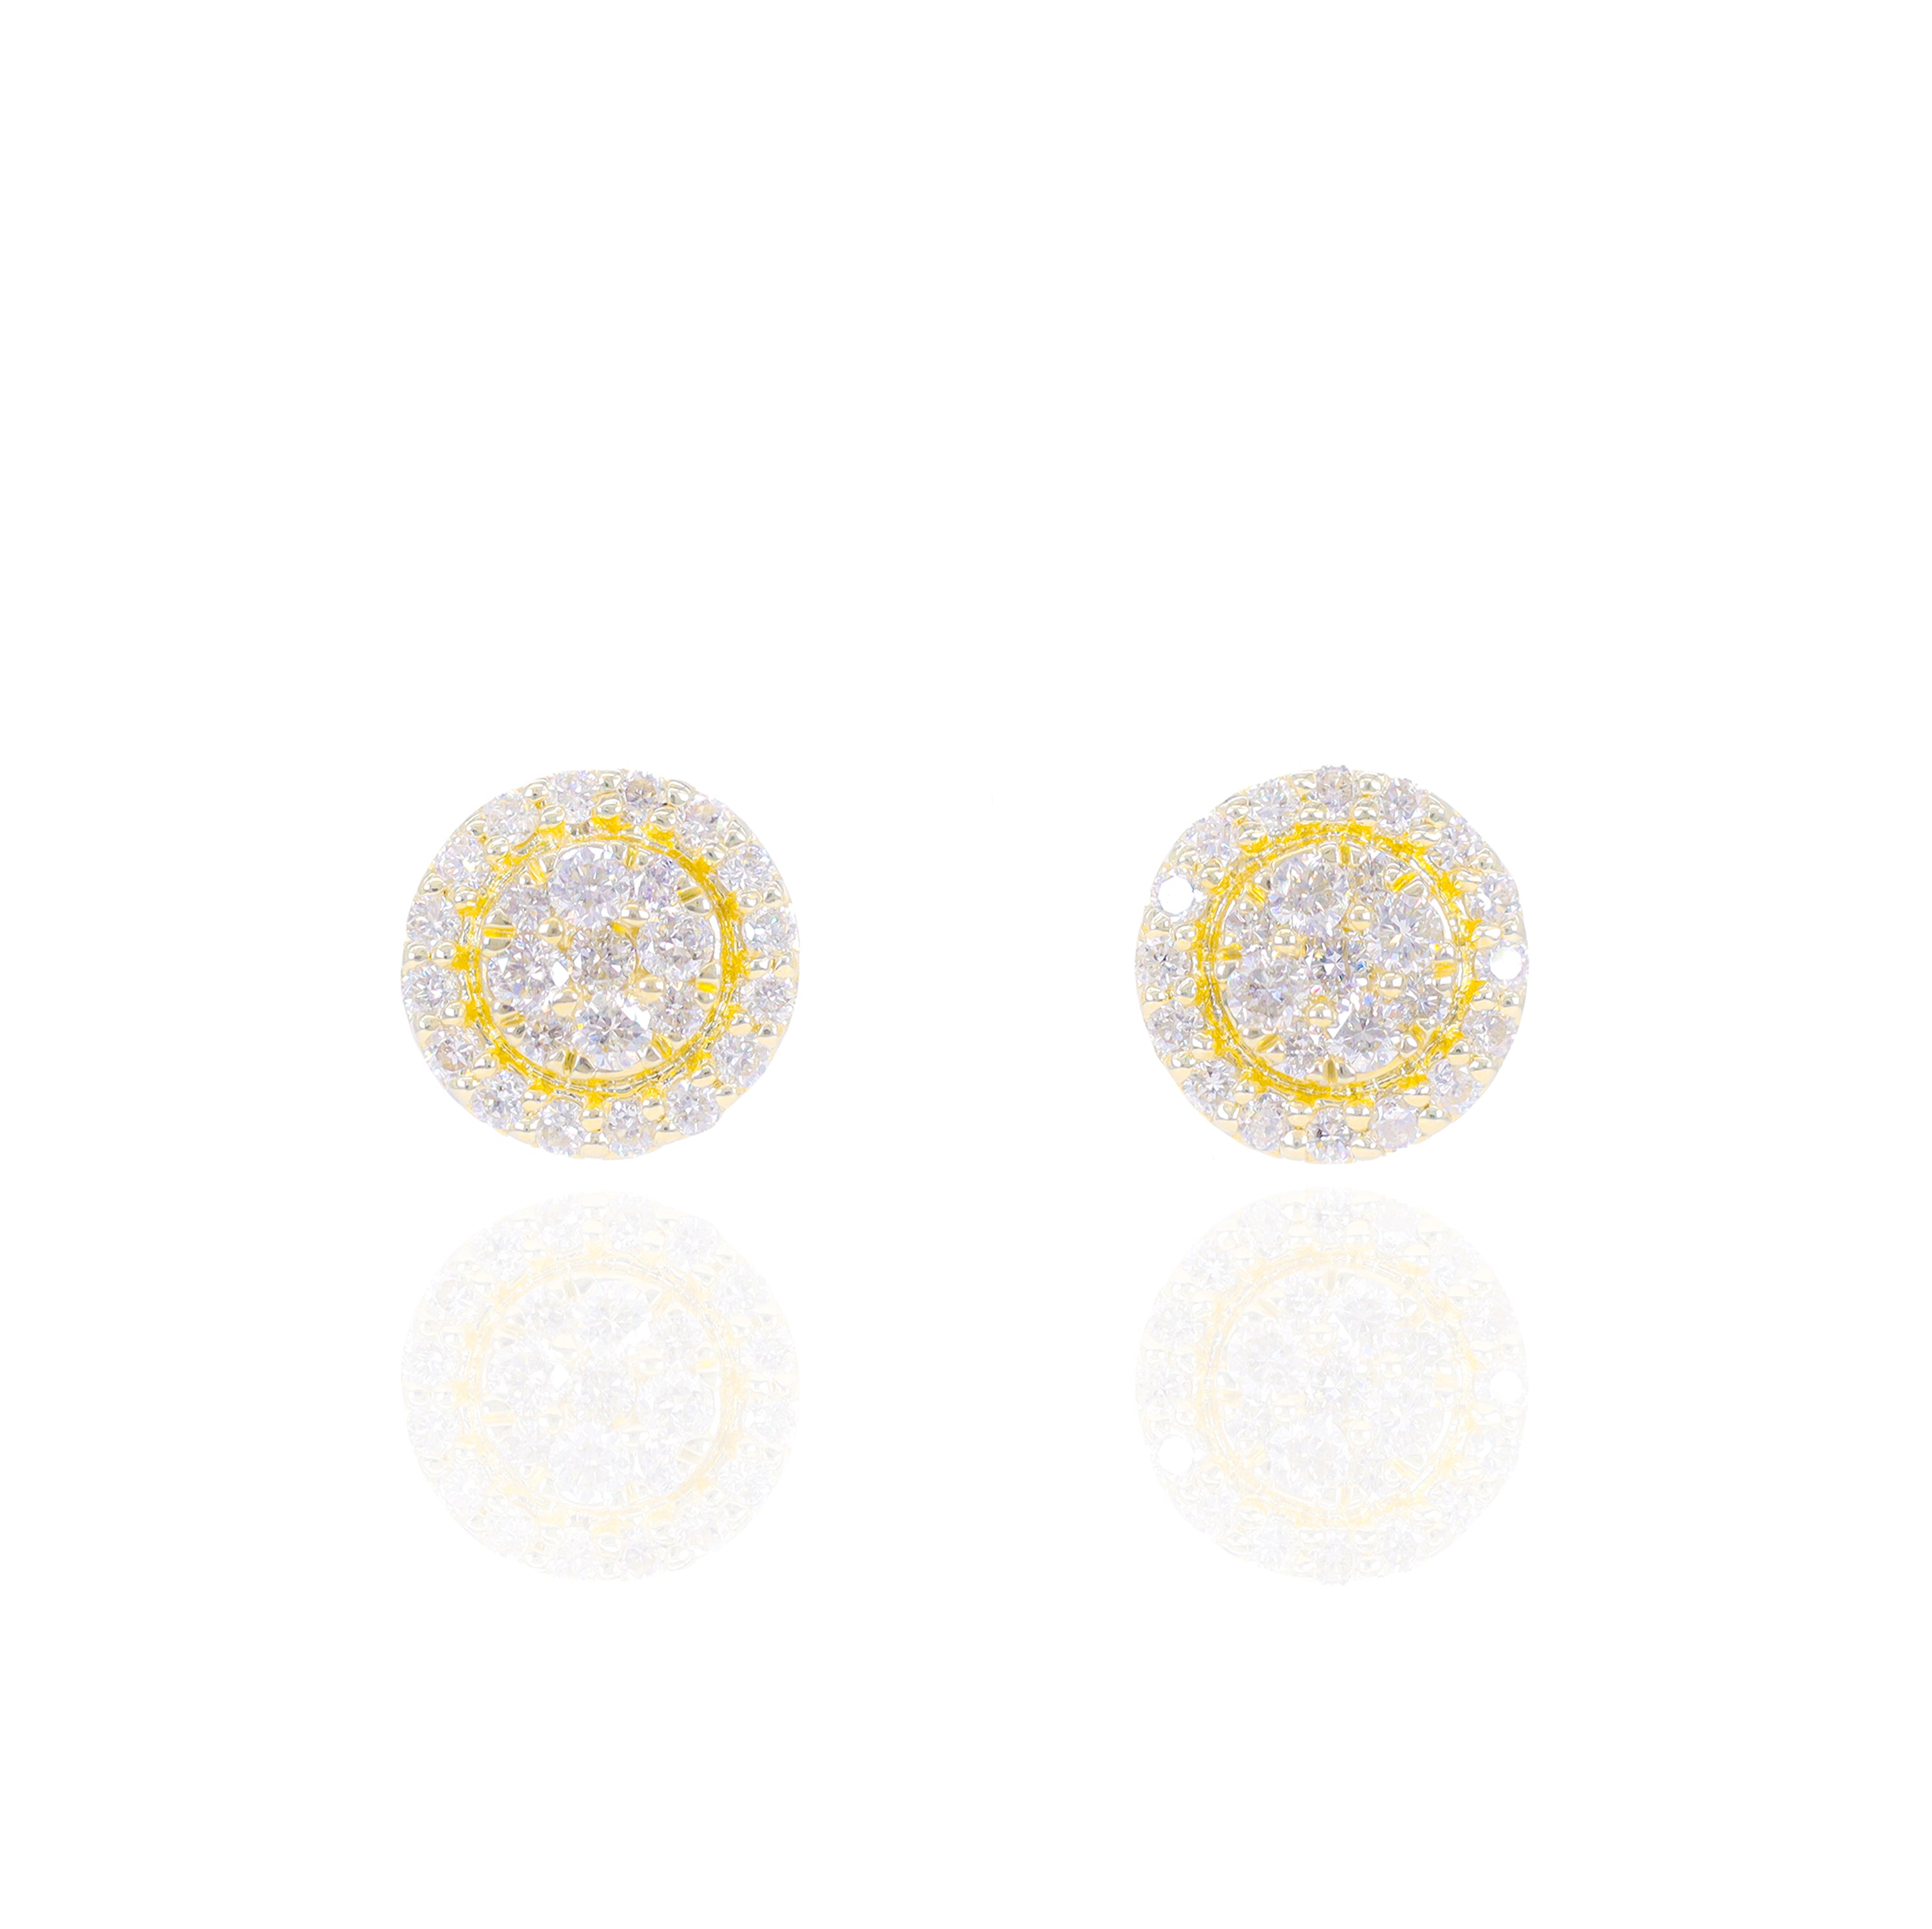 Round Cluster with Round Diamond Border Earrings